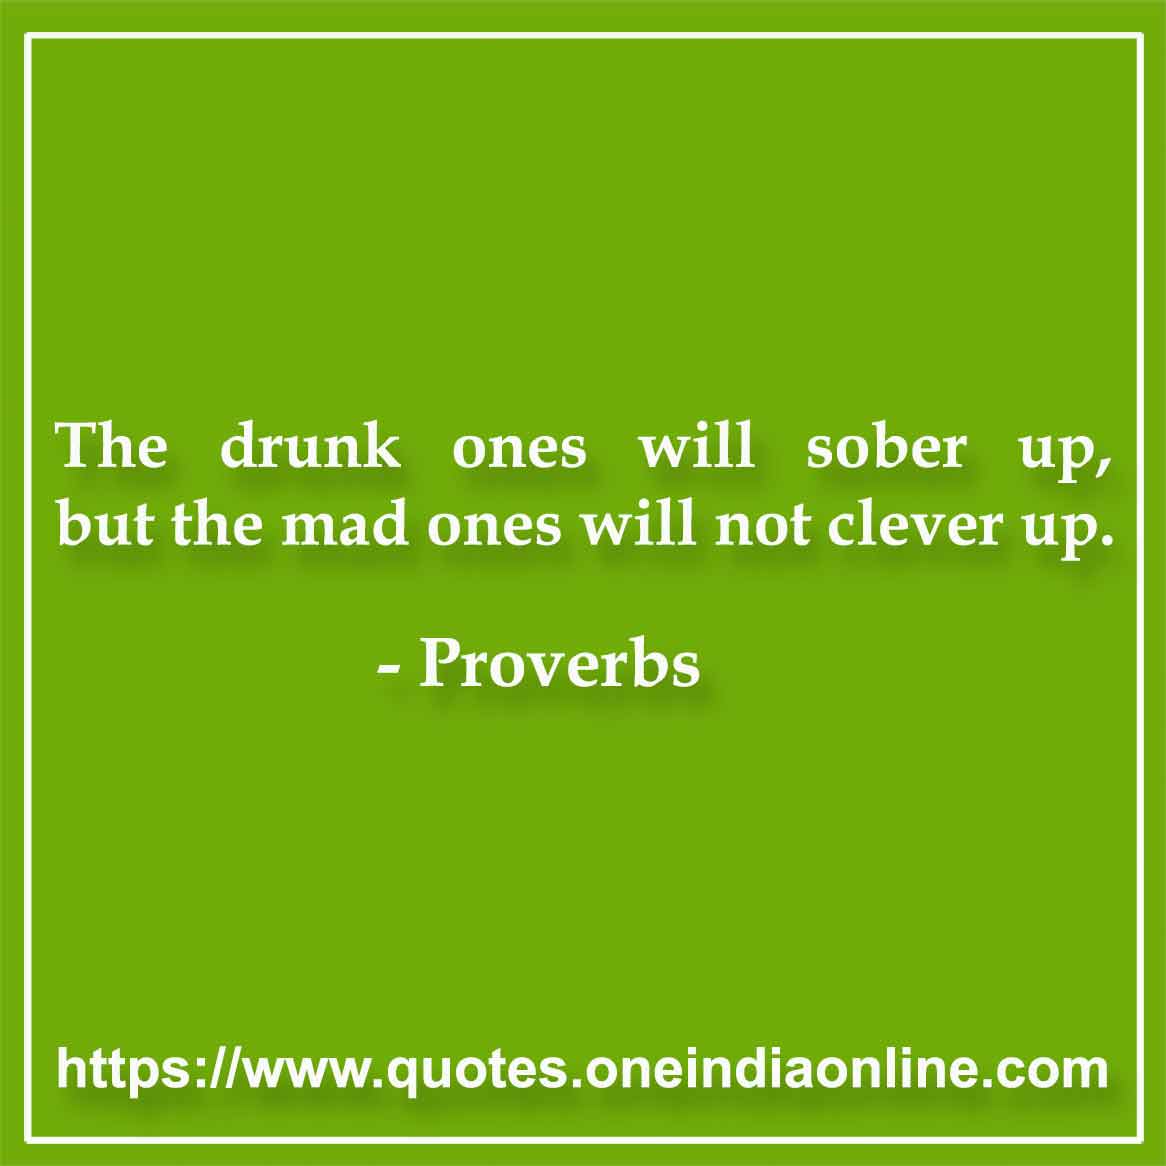 The drunk ones will sober up, but the mad ones will not clever up.

Bengali  in English